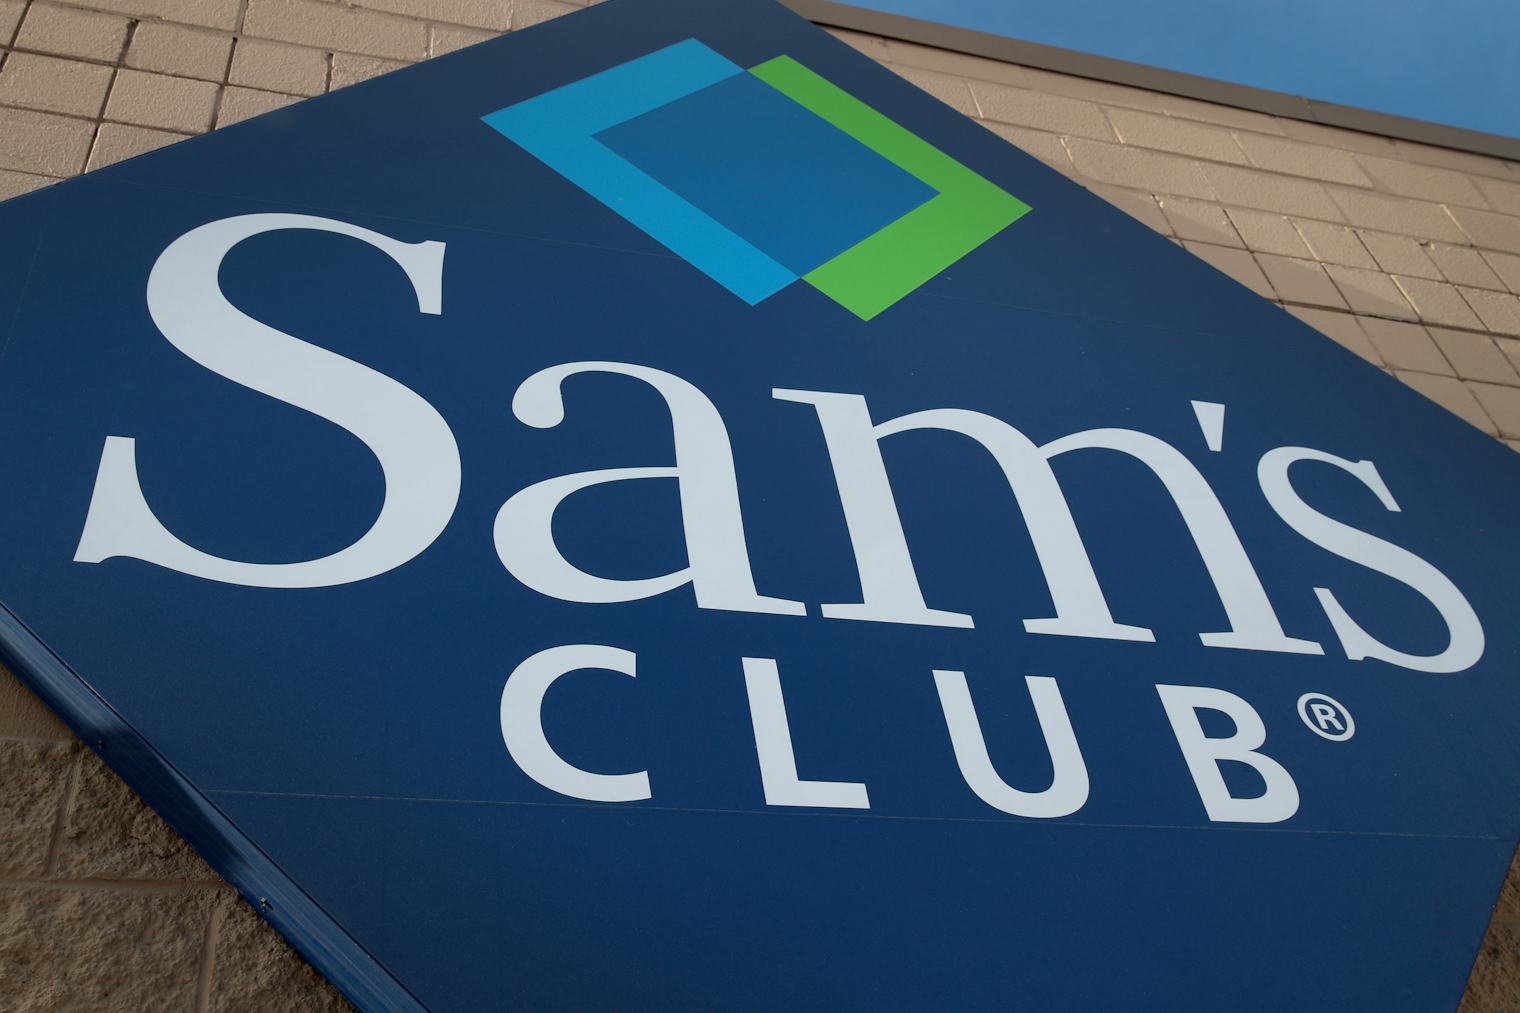 Is Sam's Club Open On Memorial Day 2021? Their Hours Will Change